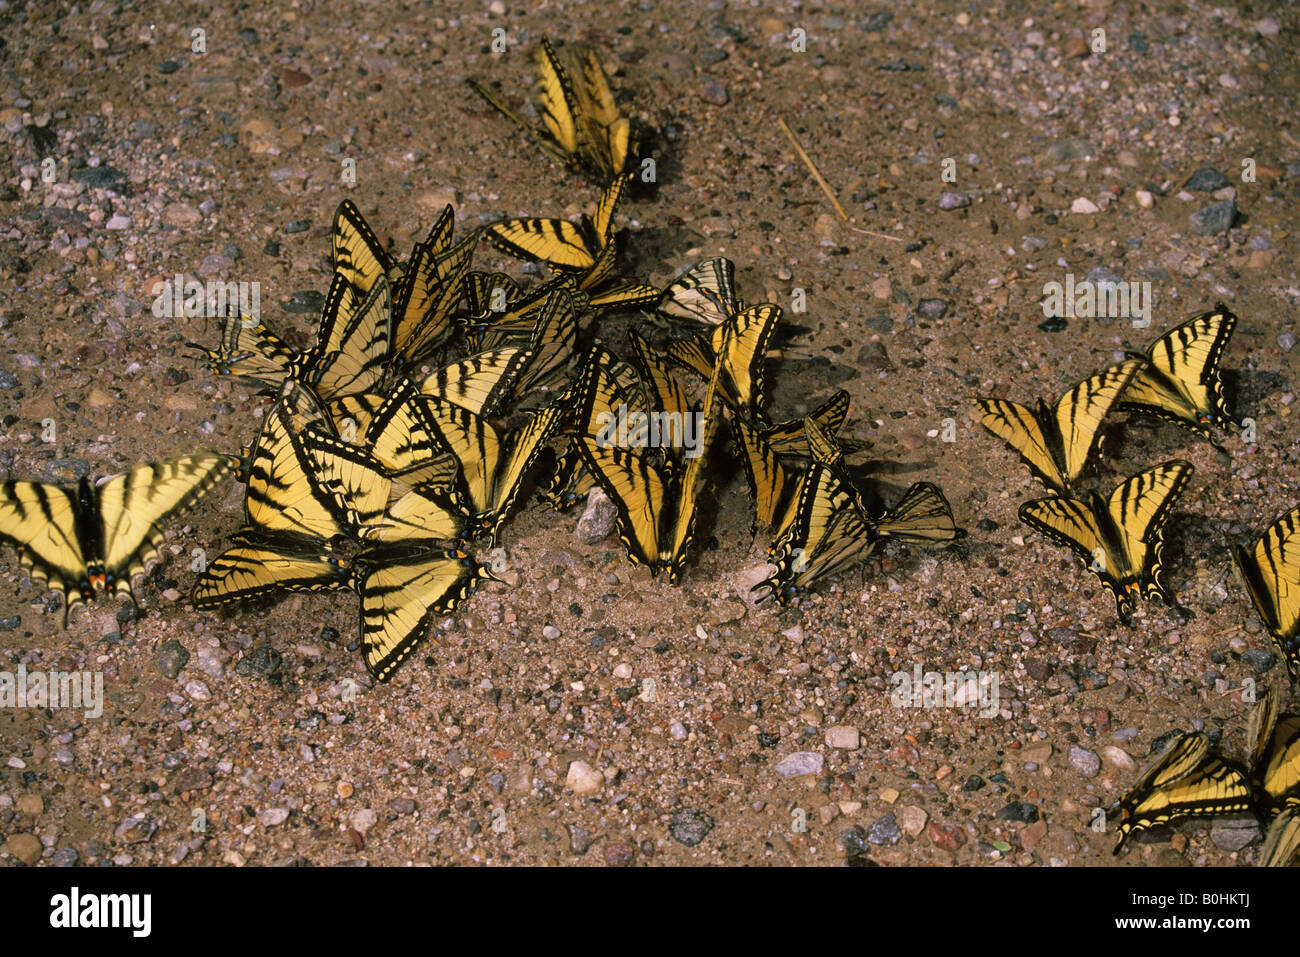 Old World - or Yellow Swallowtail butterflies (Papilio machaon) licking minerals from a gravel path in Wood Buffalo National Pa Stock Photo